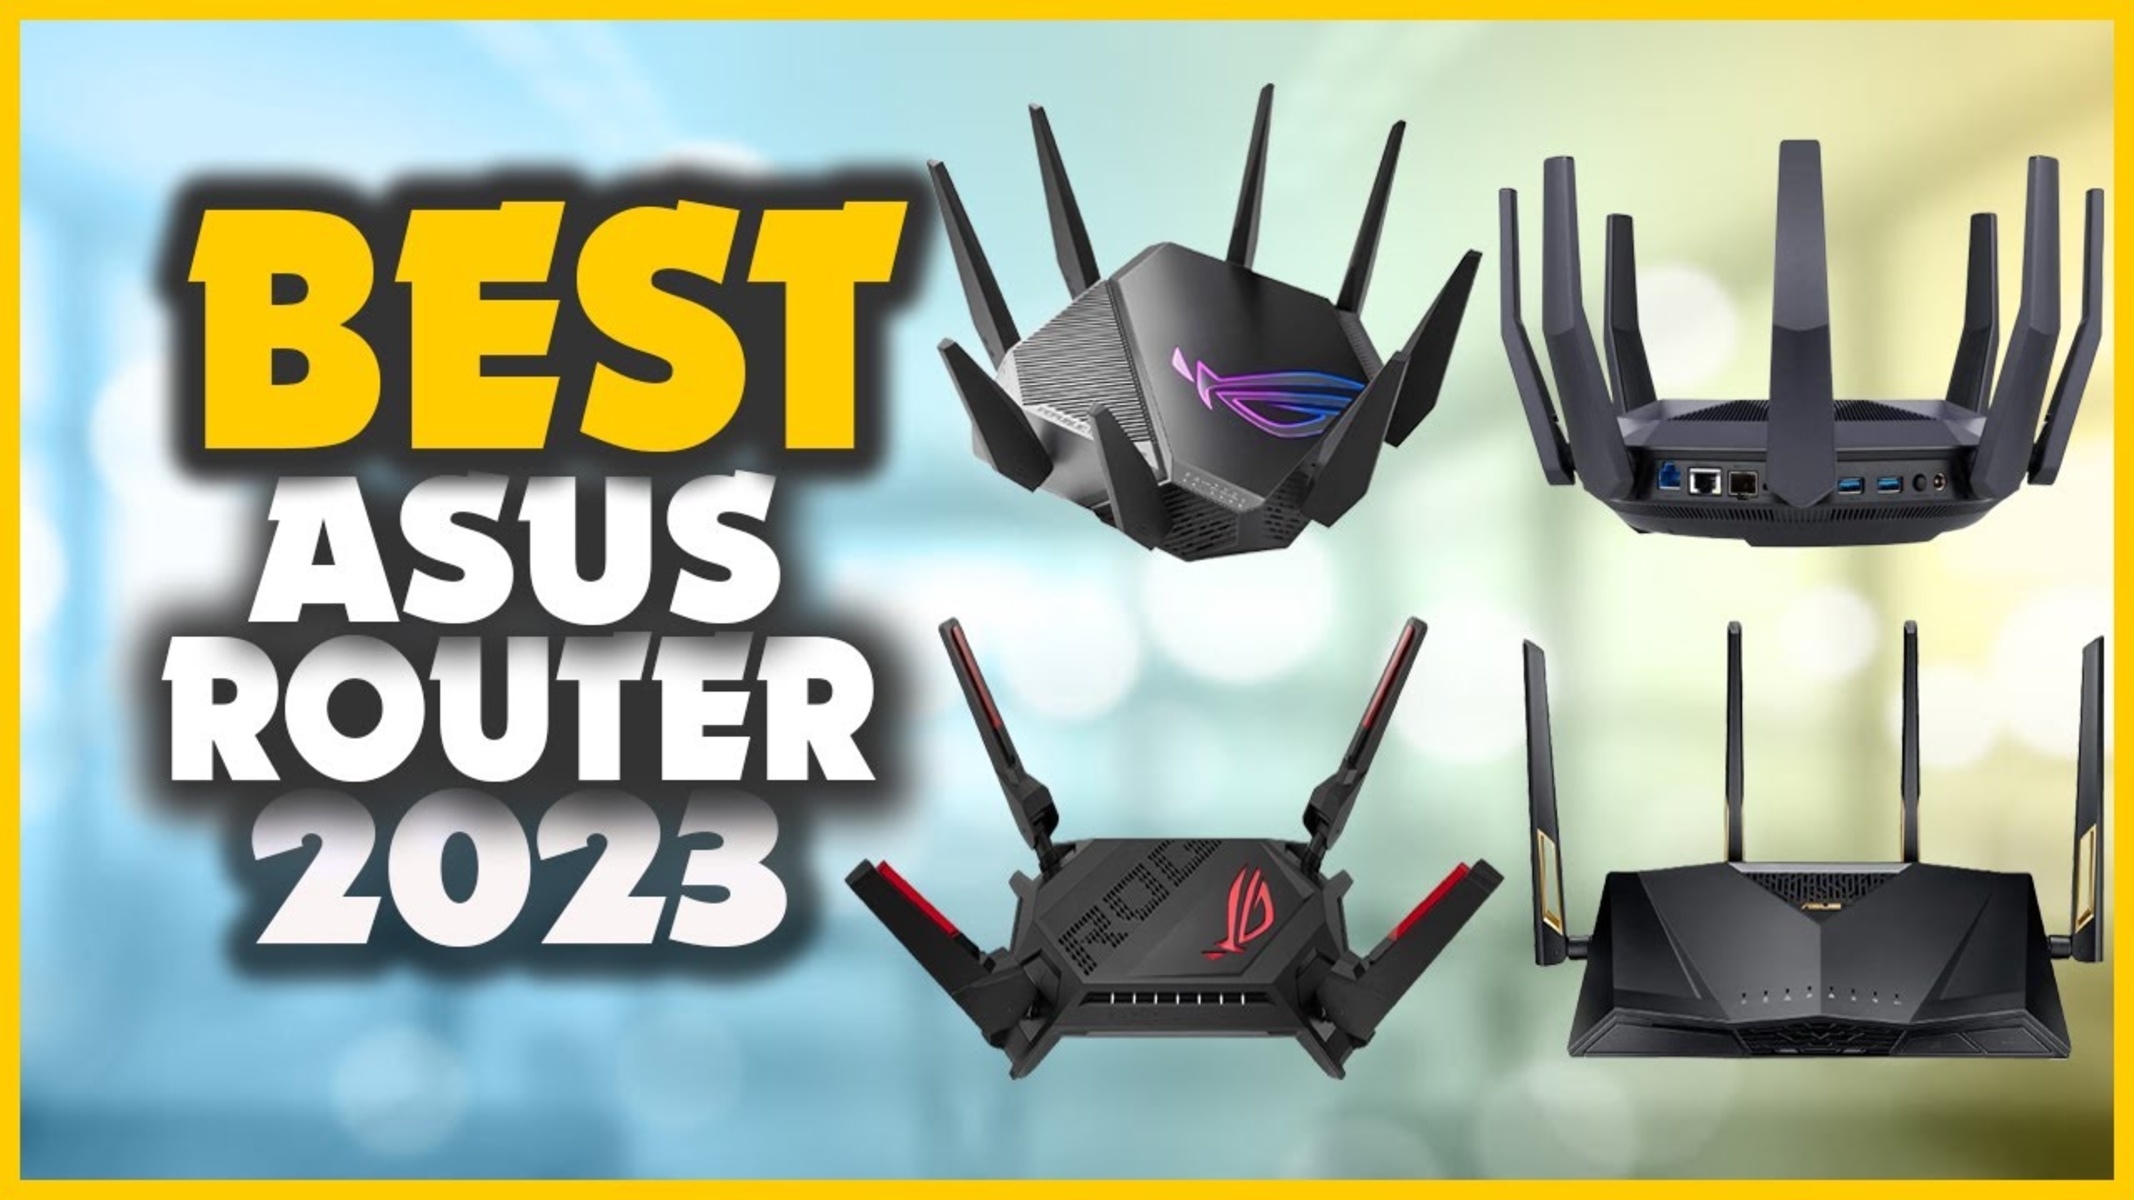 8 Best Asus WiFi Router for 2023